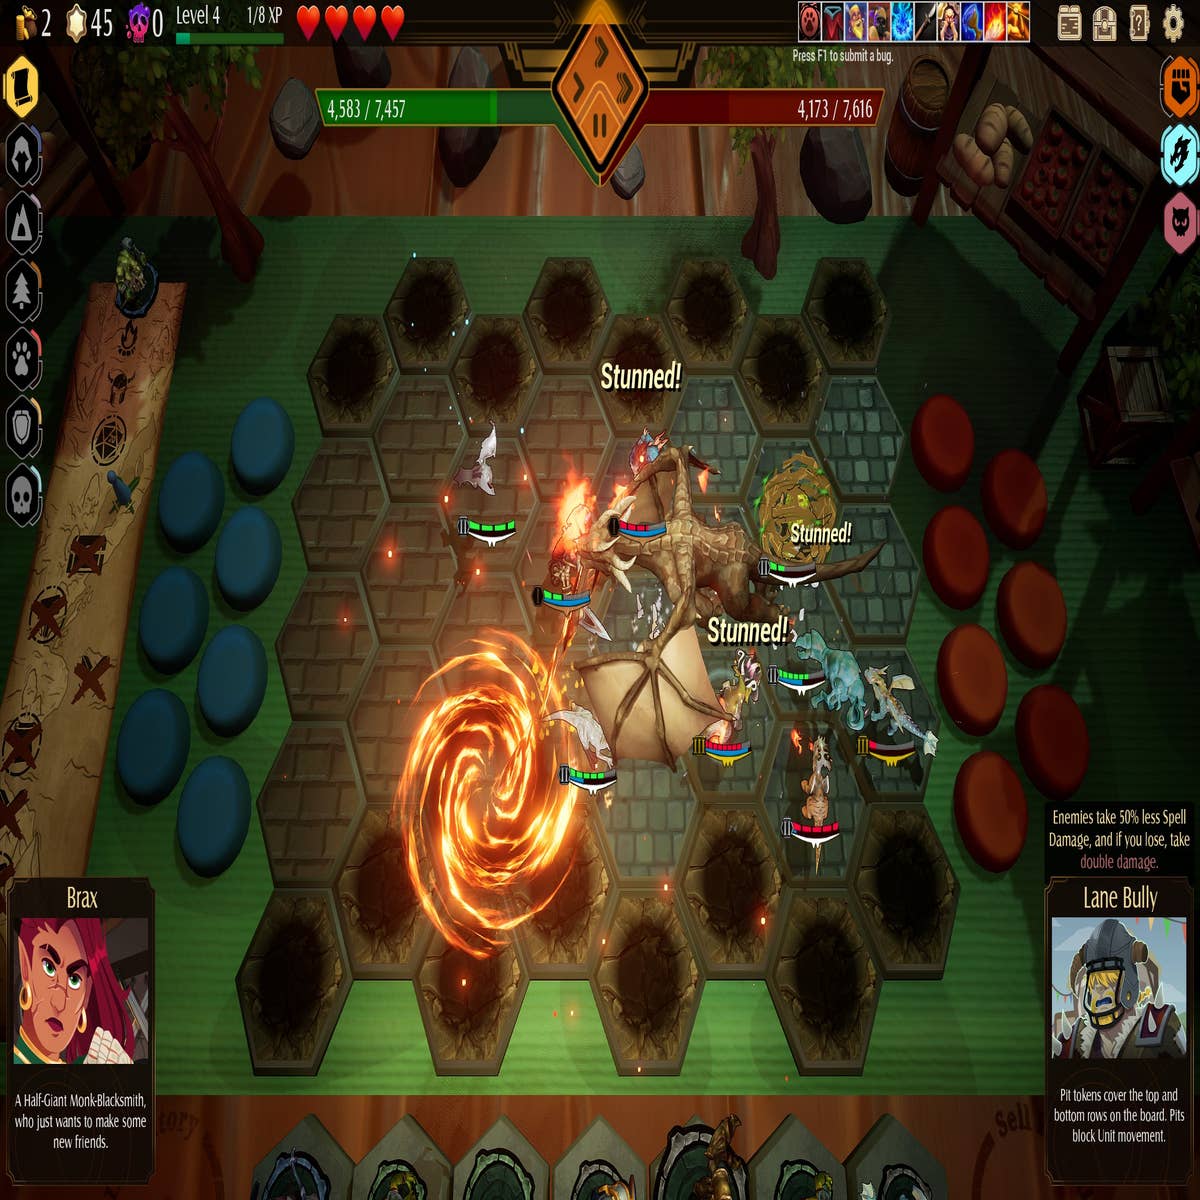 REVIEW] Teamfight Tactics Mobile, the Complex Auto Battler Game By